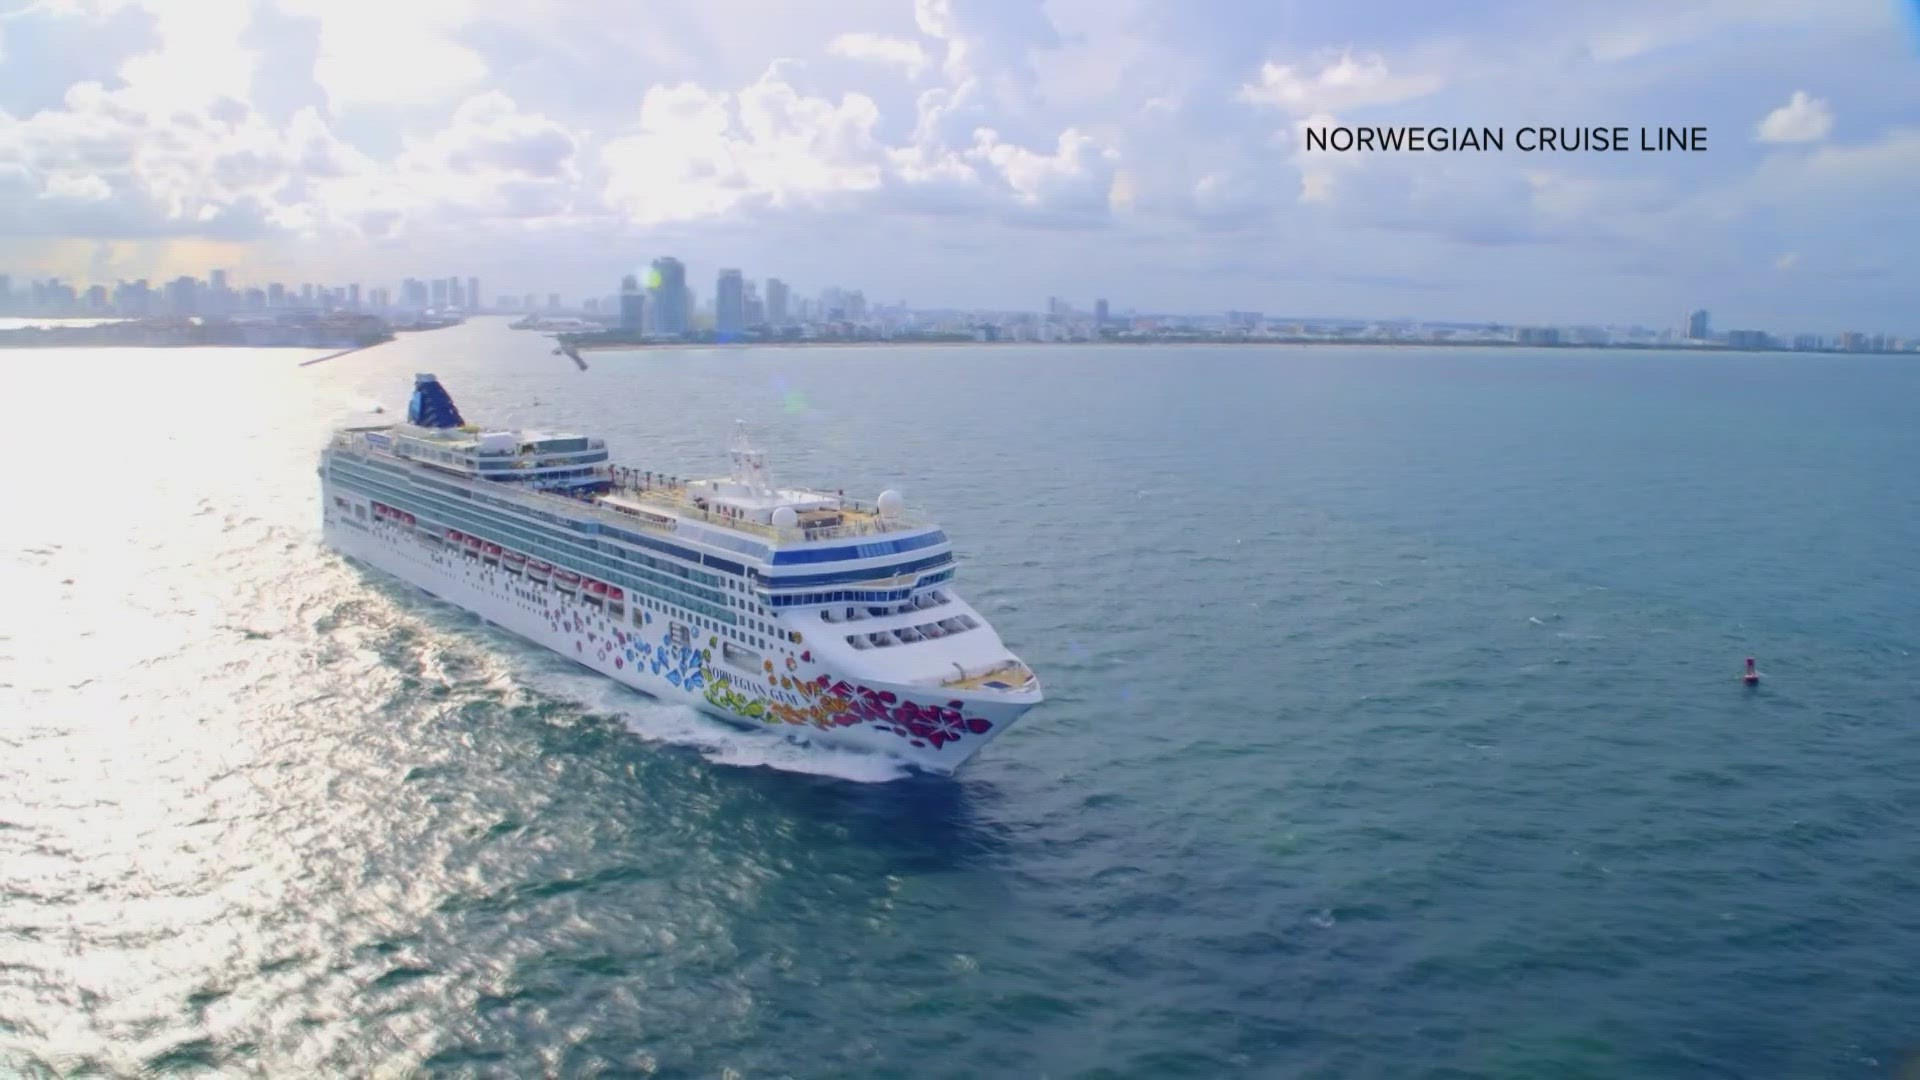 The JAXPORT Board of Directors unanimously approved an agreement with Norwegian Cruise Line on Tuesday to bring the Norwegian Gem to Jacksonville.